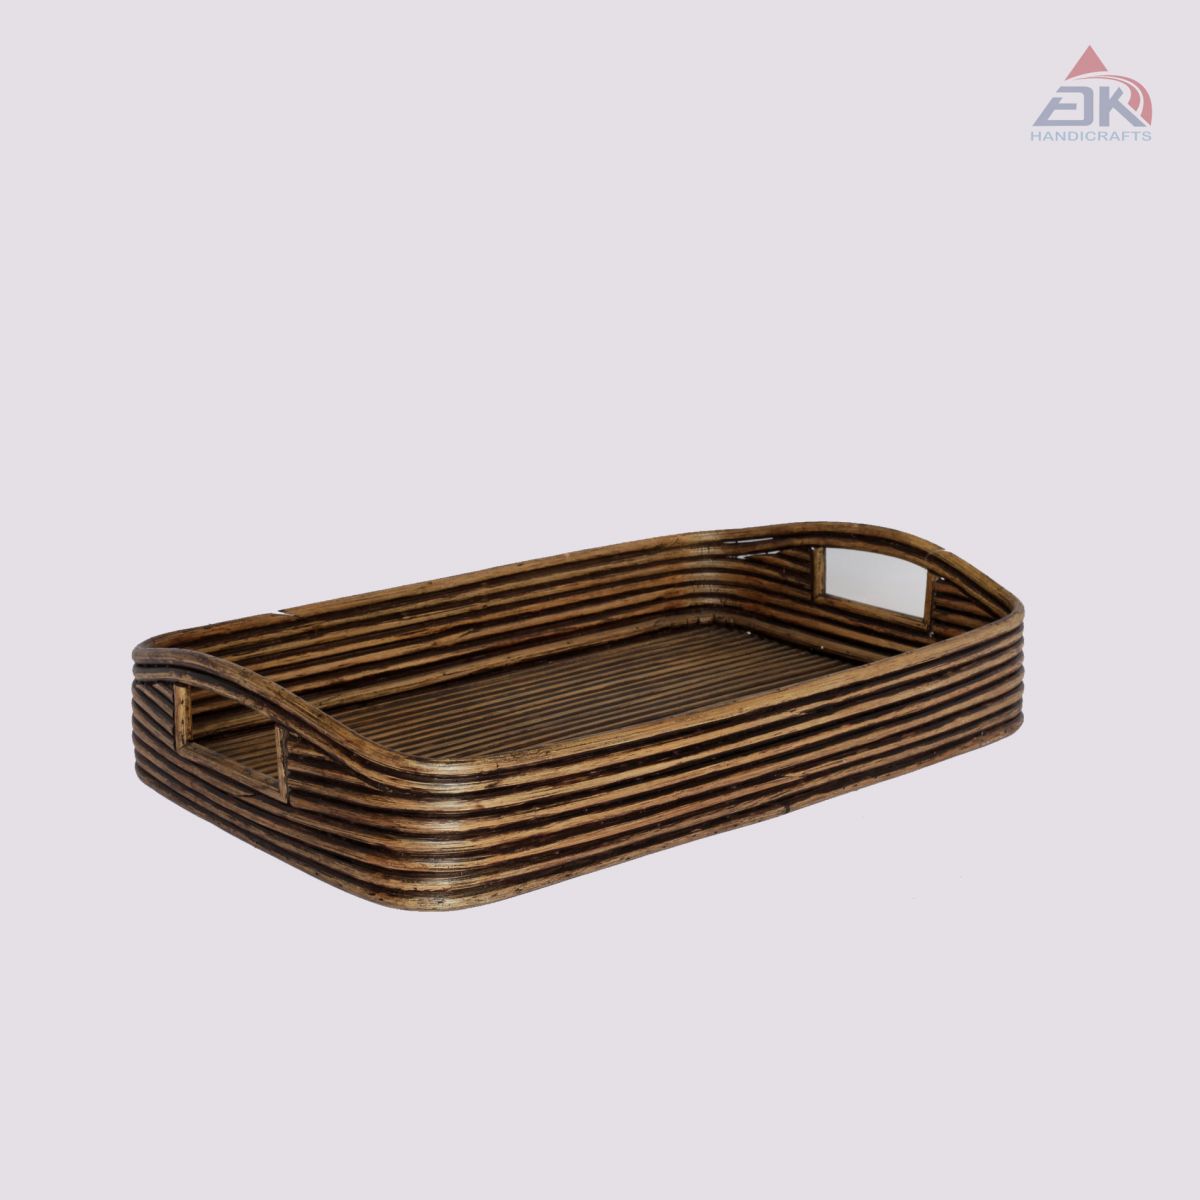 Tray Rattan Coiled # DK120